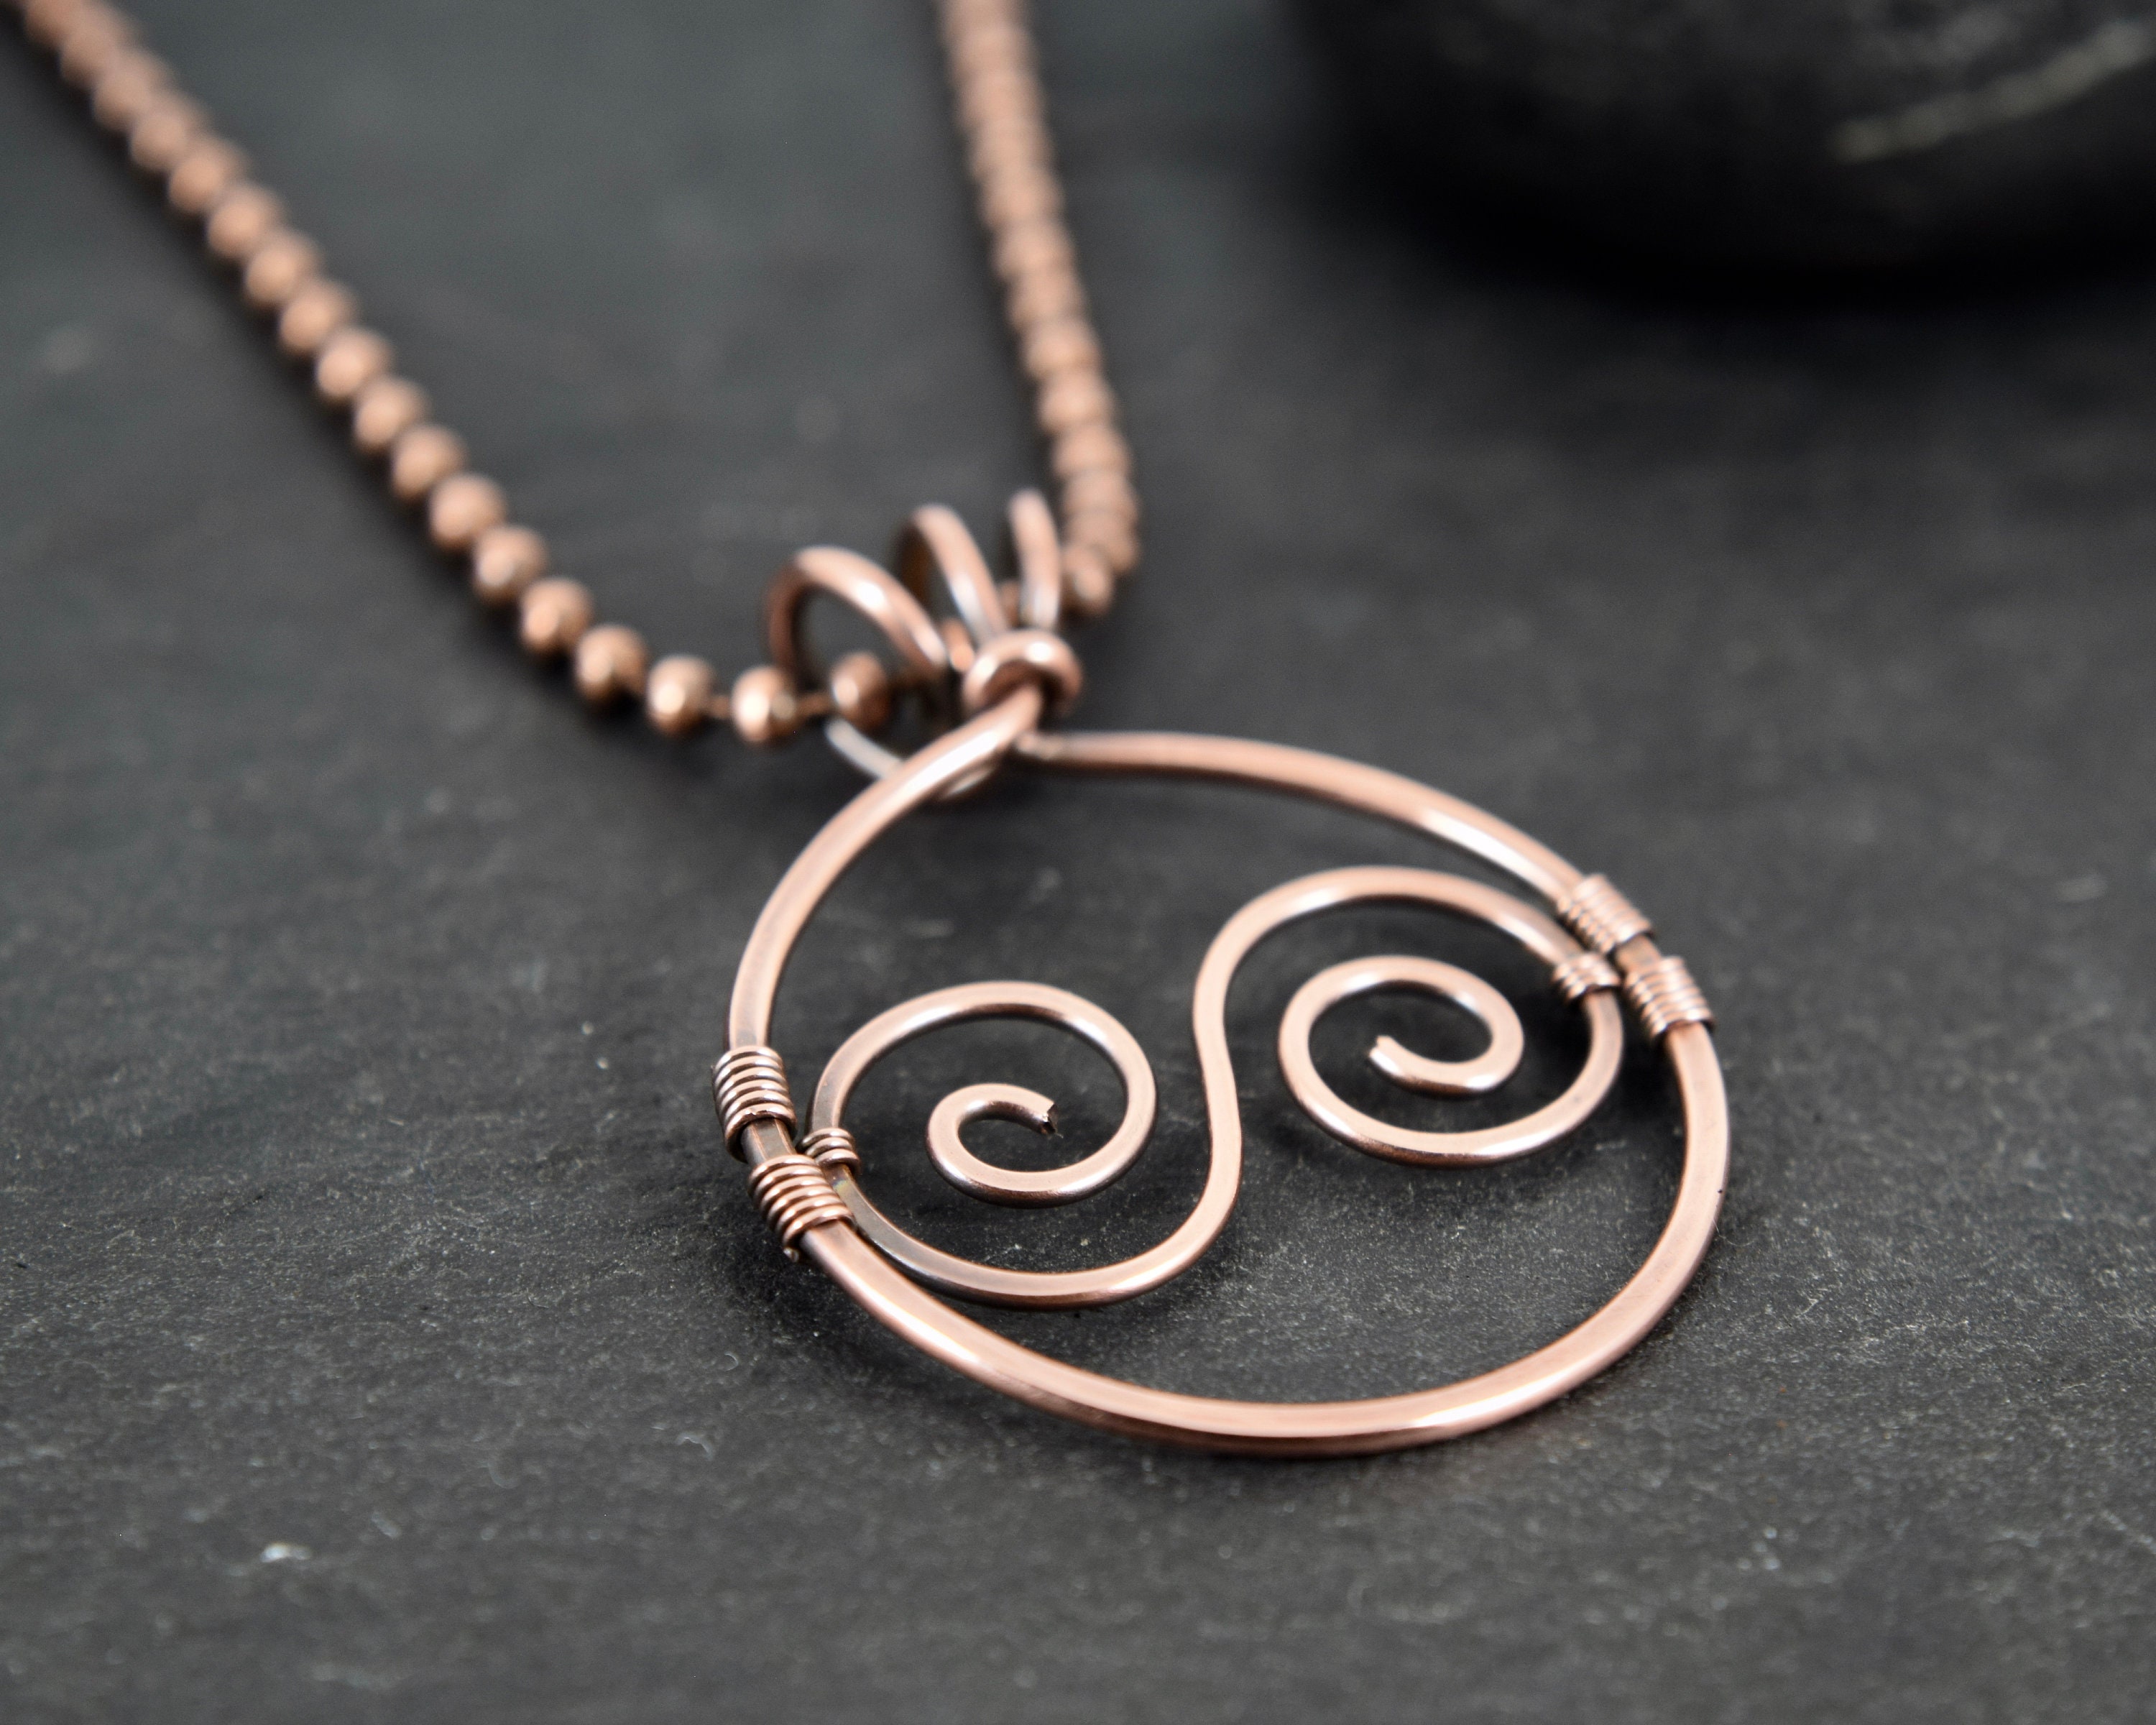 Copper Spiral Pendant Necklace, Rustic Jewellery for Her or Him, Celtic,  Viking Jewellery, Oxidised Copper, Wire Wrapped Pendant 